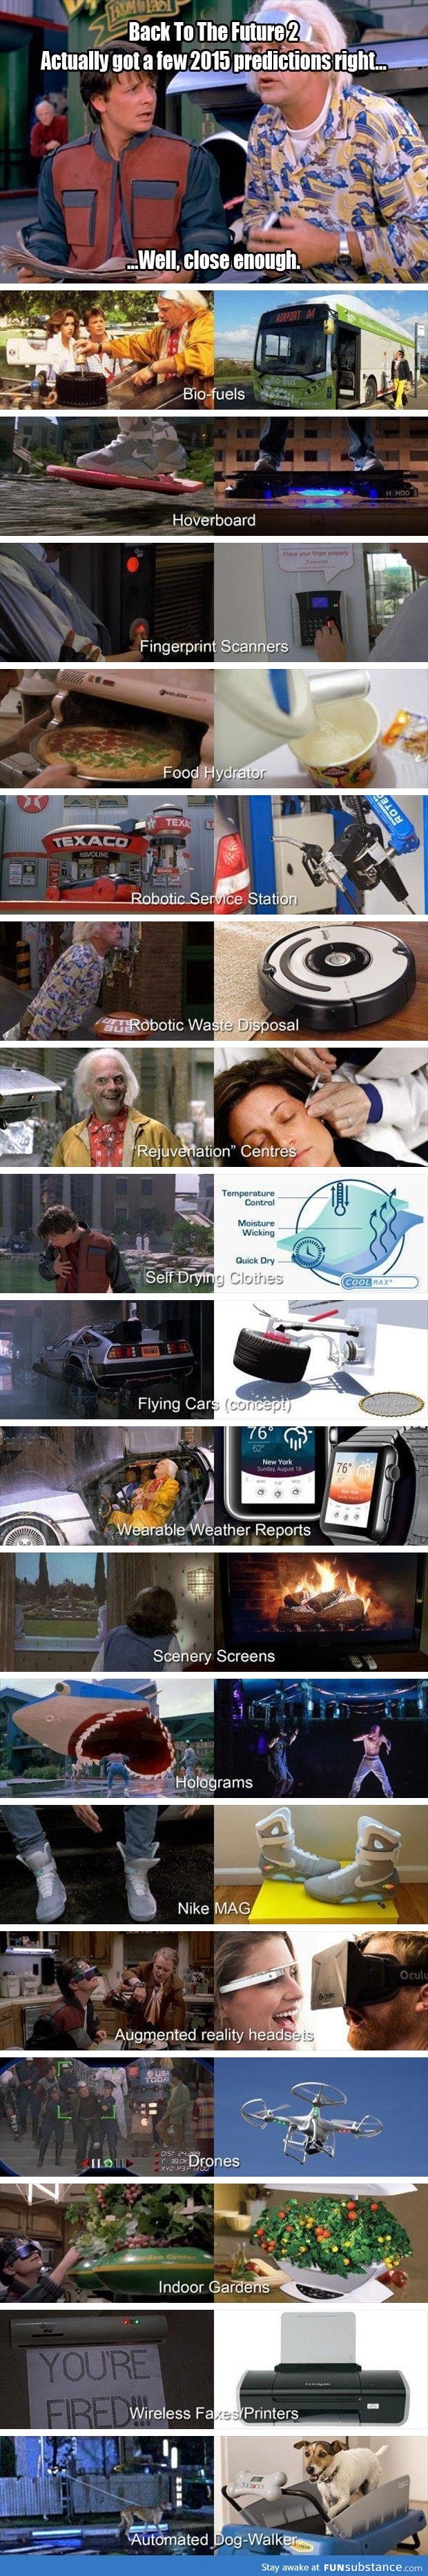 Back to the future got some things right